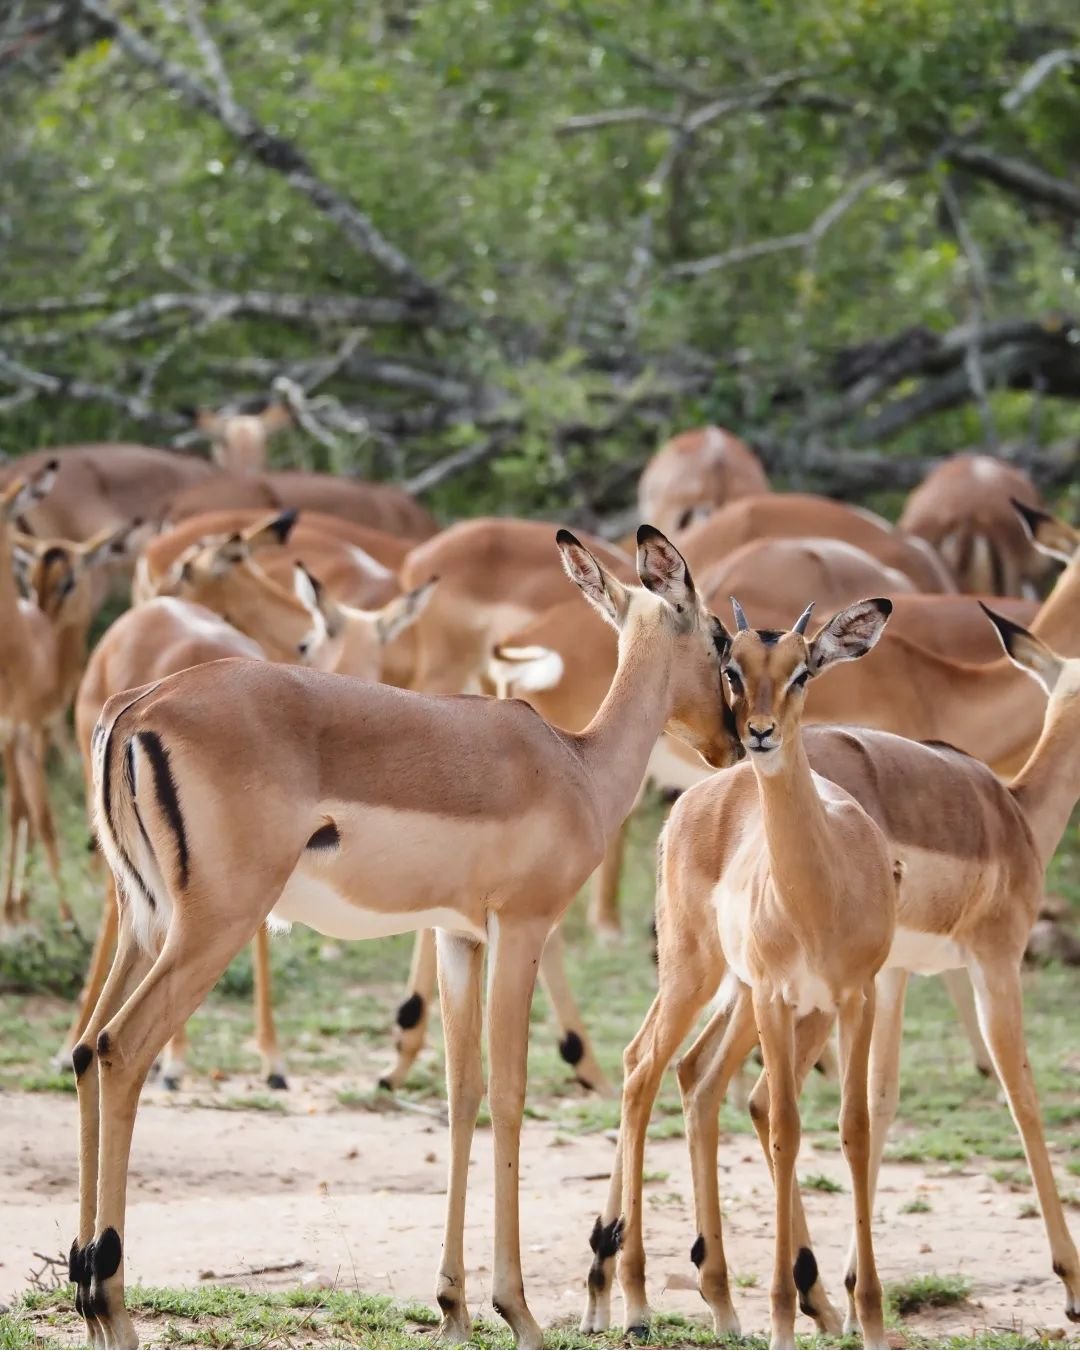 grazers everywhere, all with such different social structures. side note, impalas are quite tasty. #jennLAtravels